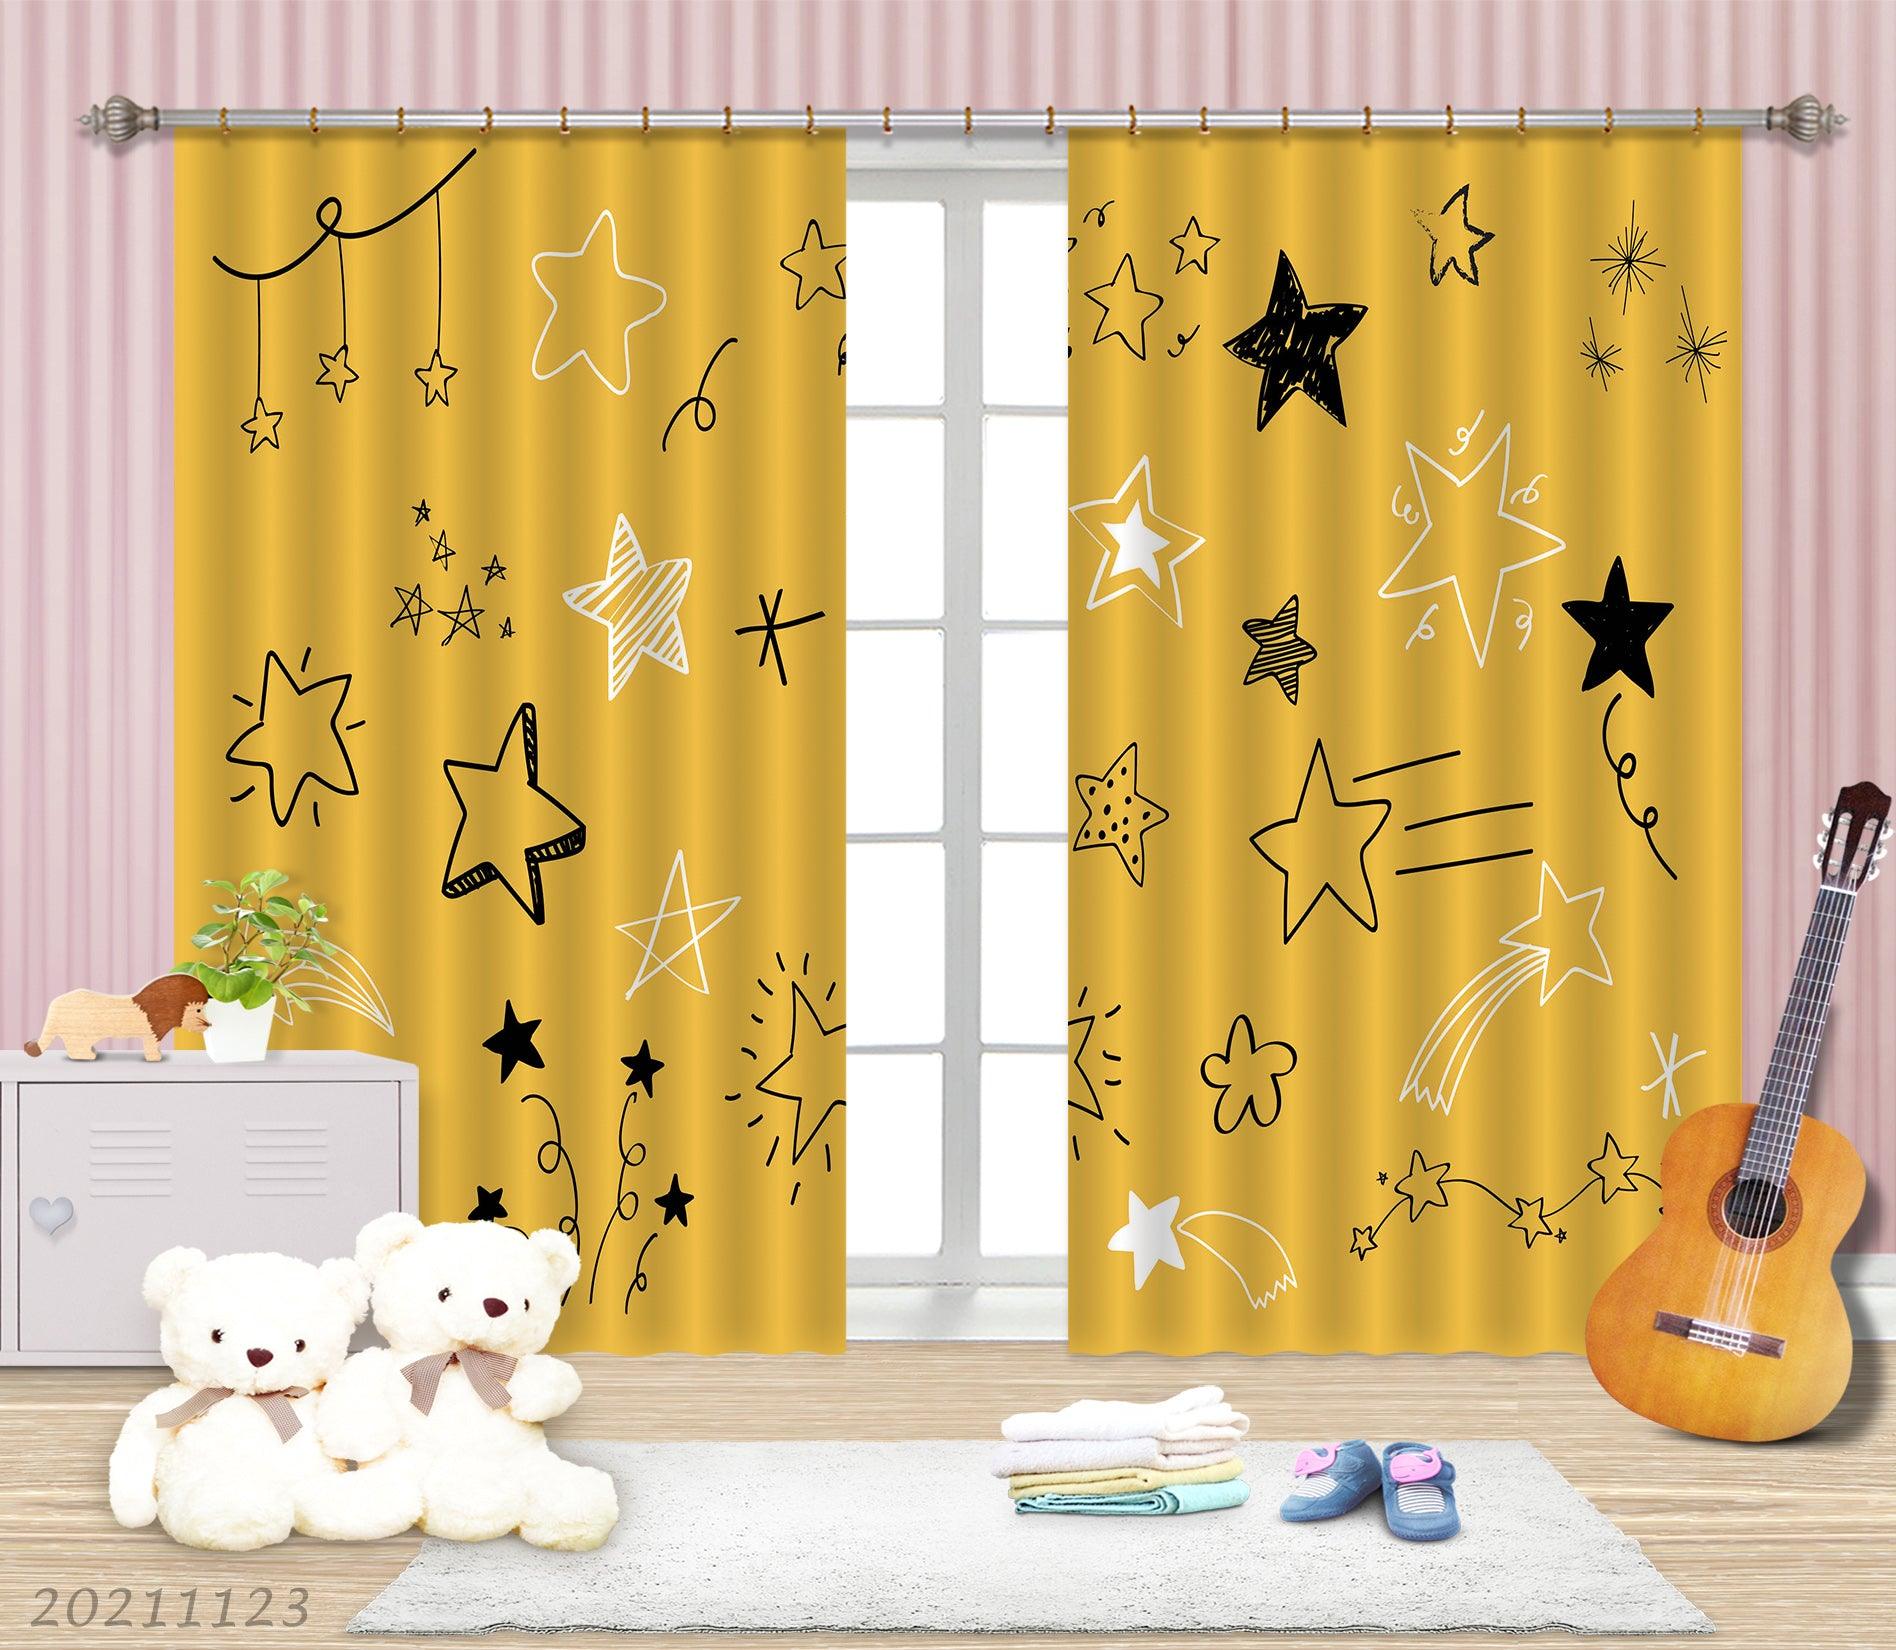 3D Yellow Star Pattern Curtains and Drapes LQH 75- Jess Art Decoration